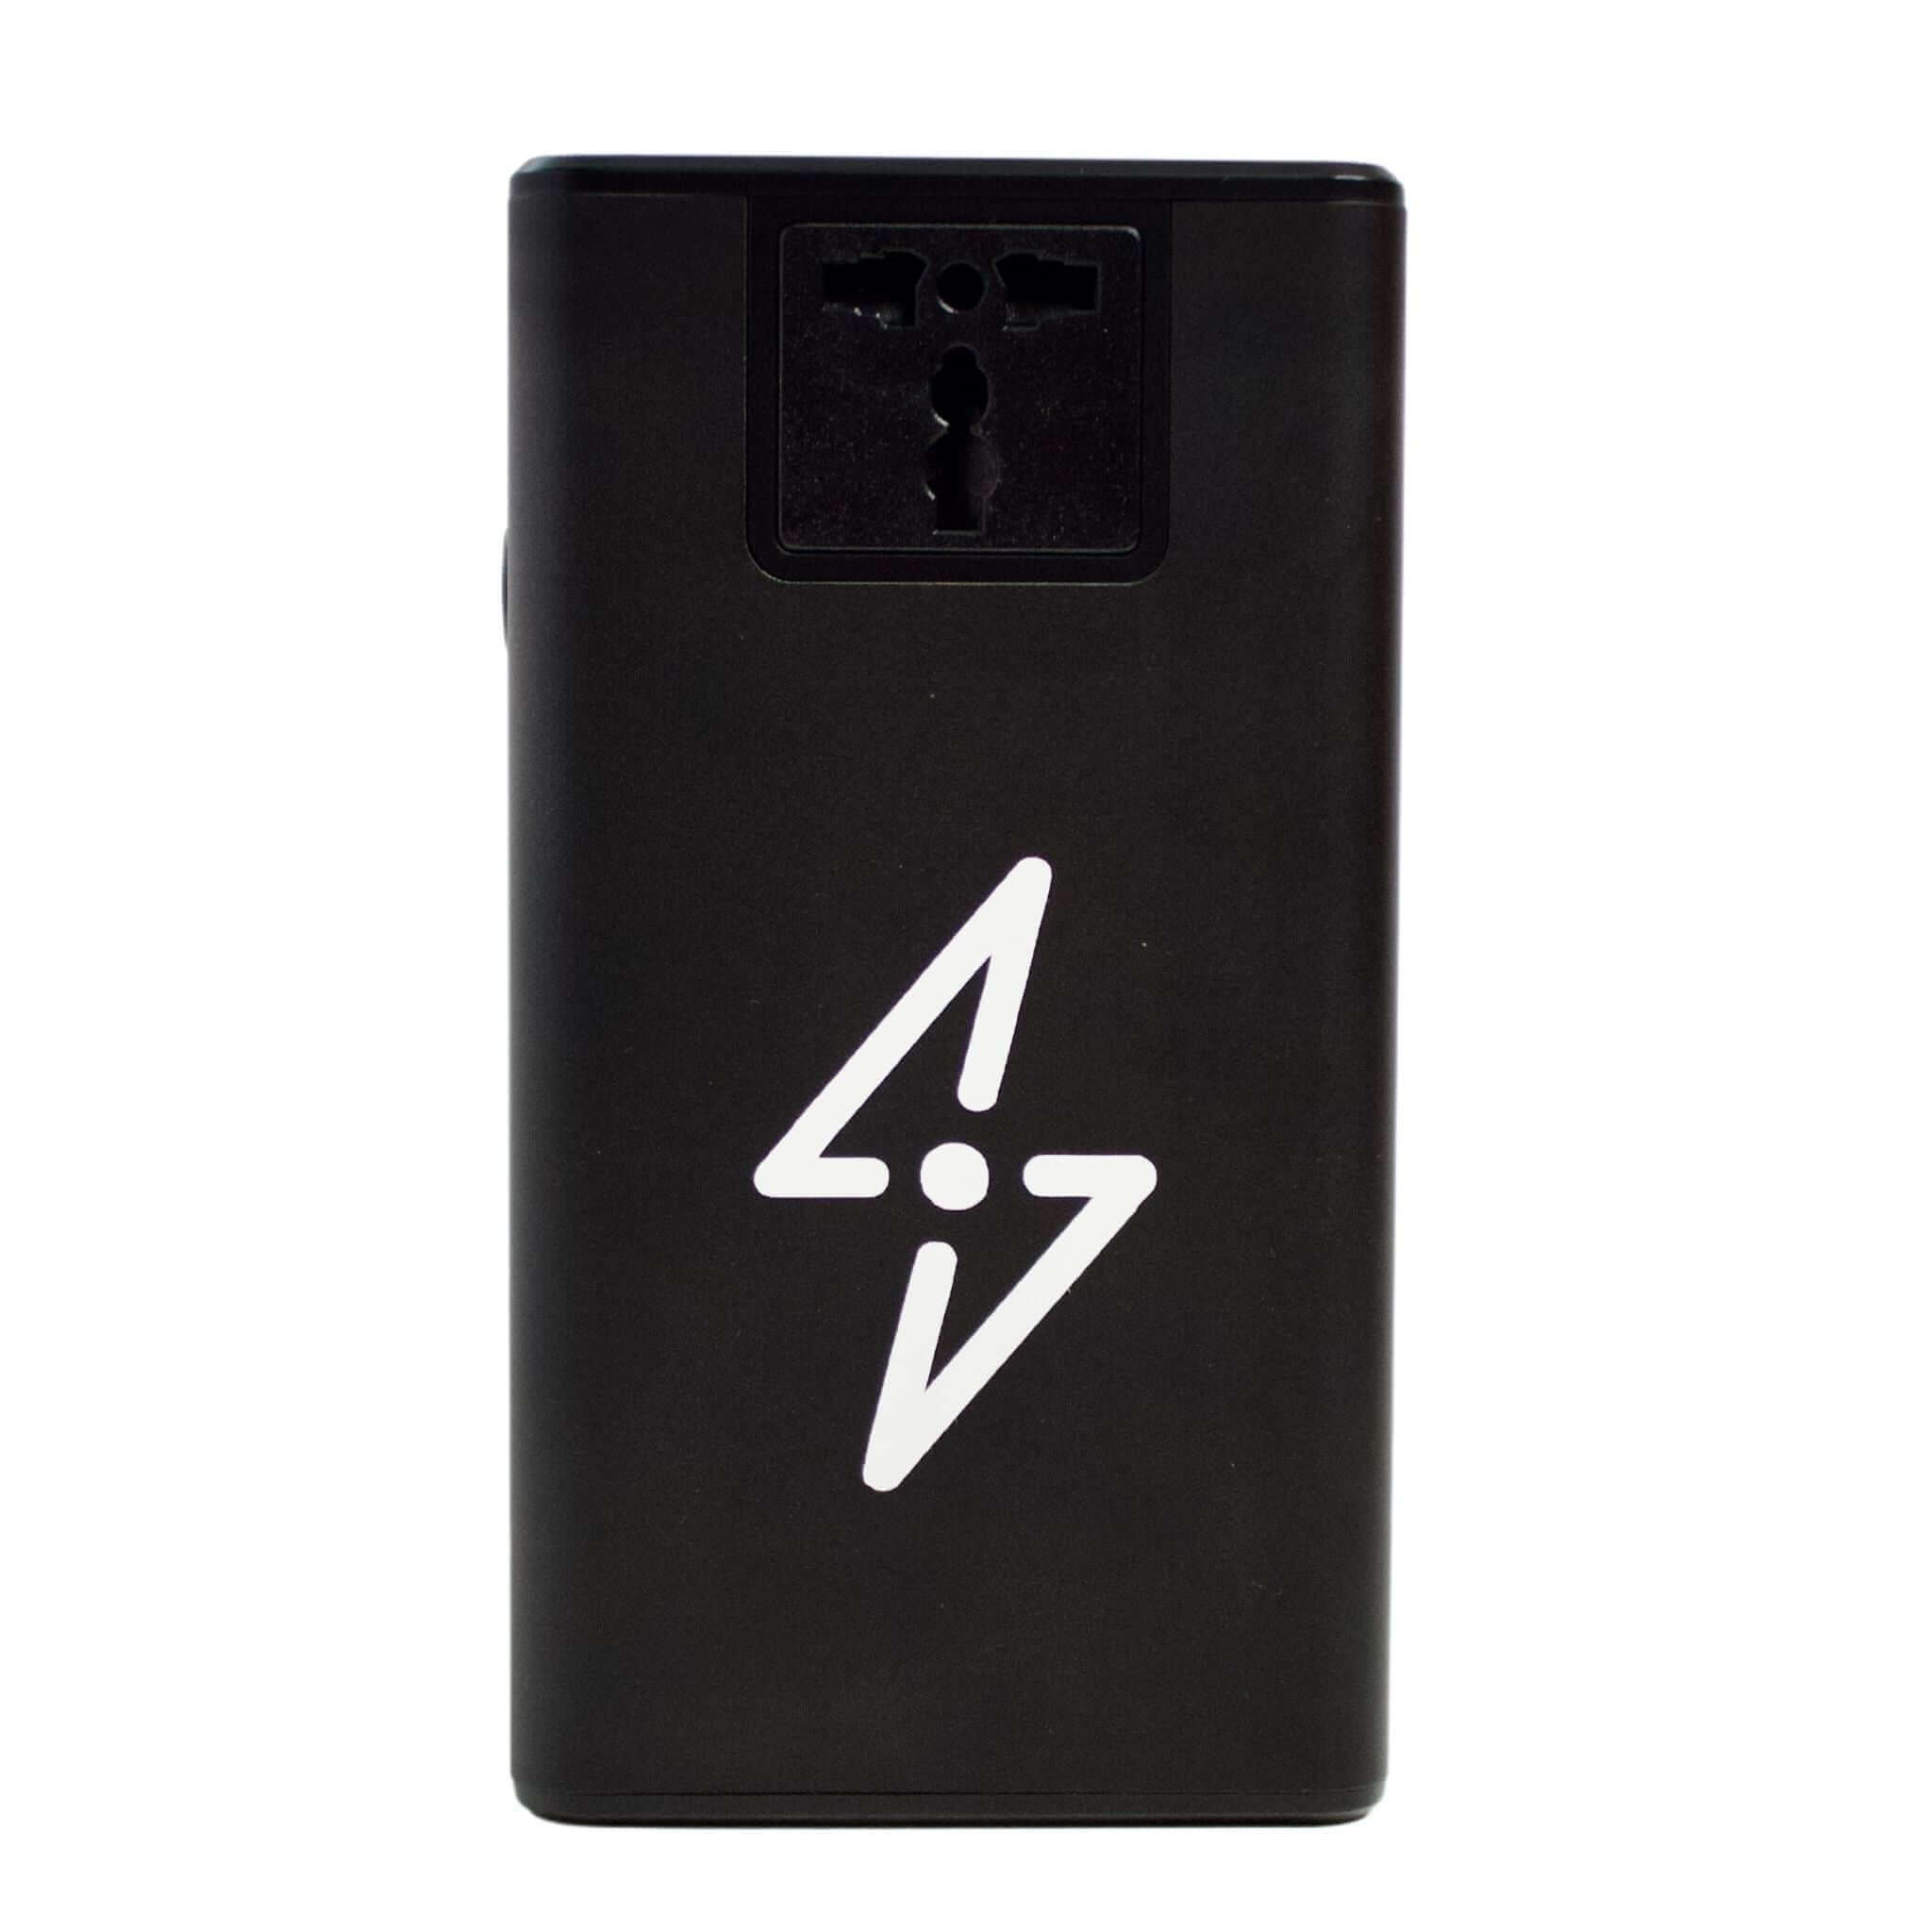 Recover Vibe Power Bank - Recover Vibe